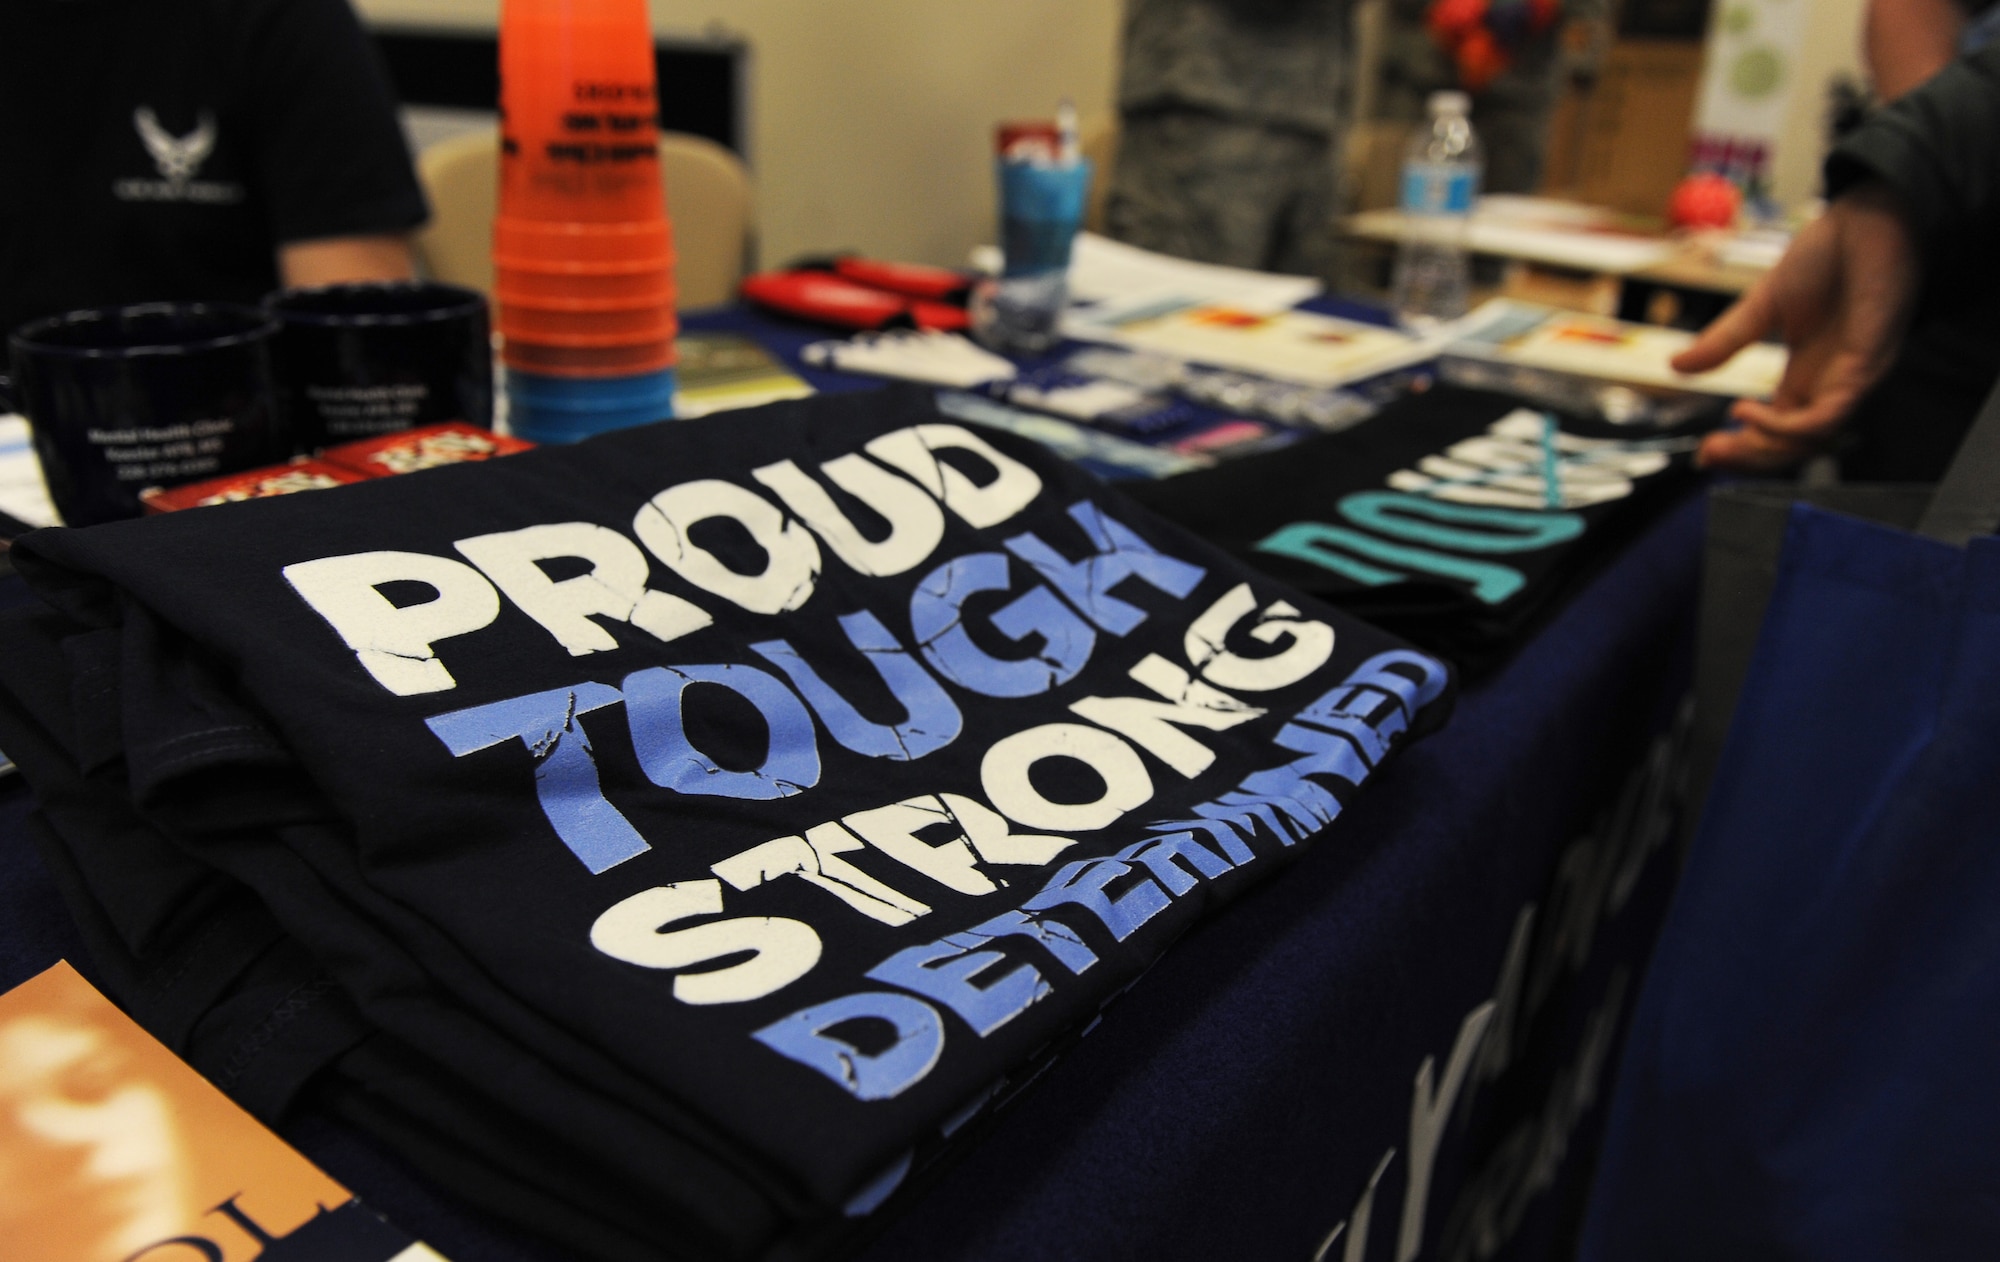 Family Advocacy shirts sit on display for Airmen during the National Women’s History Fair at the Roberts Consolidated Maintenance Facility Mar. 24, 2016, Keesler Air Force Base, Miss. The event was held in honor of National Women’s History Month.  Also included, were health and informational booths, a guest panel of accomplished women and a presentation honoring Keesler women of distinction.  (U.S. Air Force photo by Kemberly Groue)